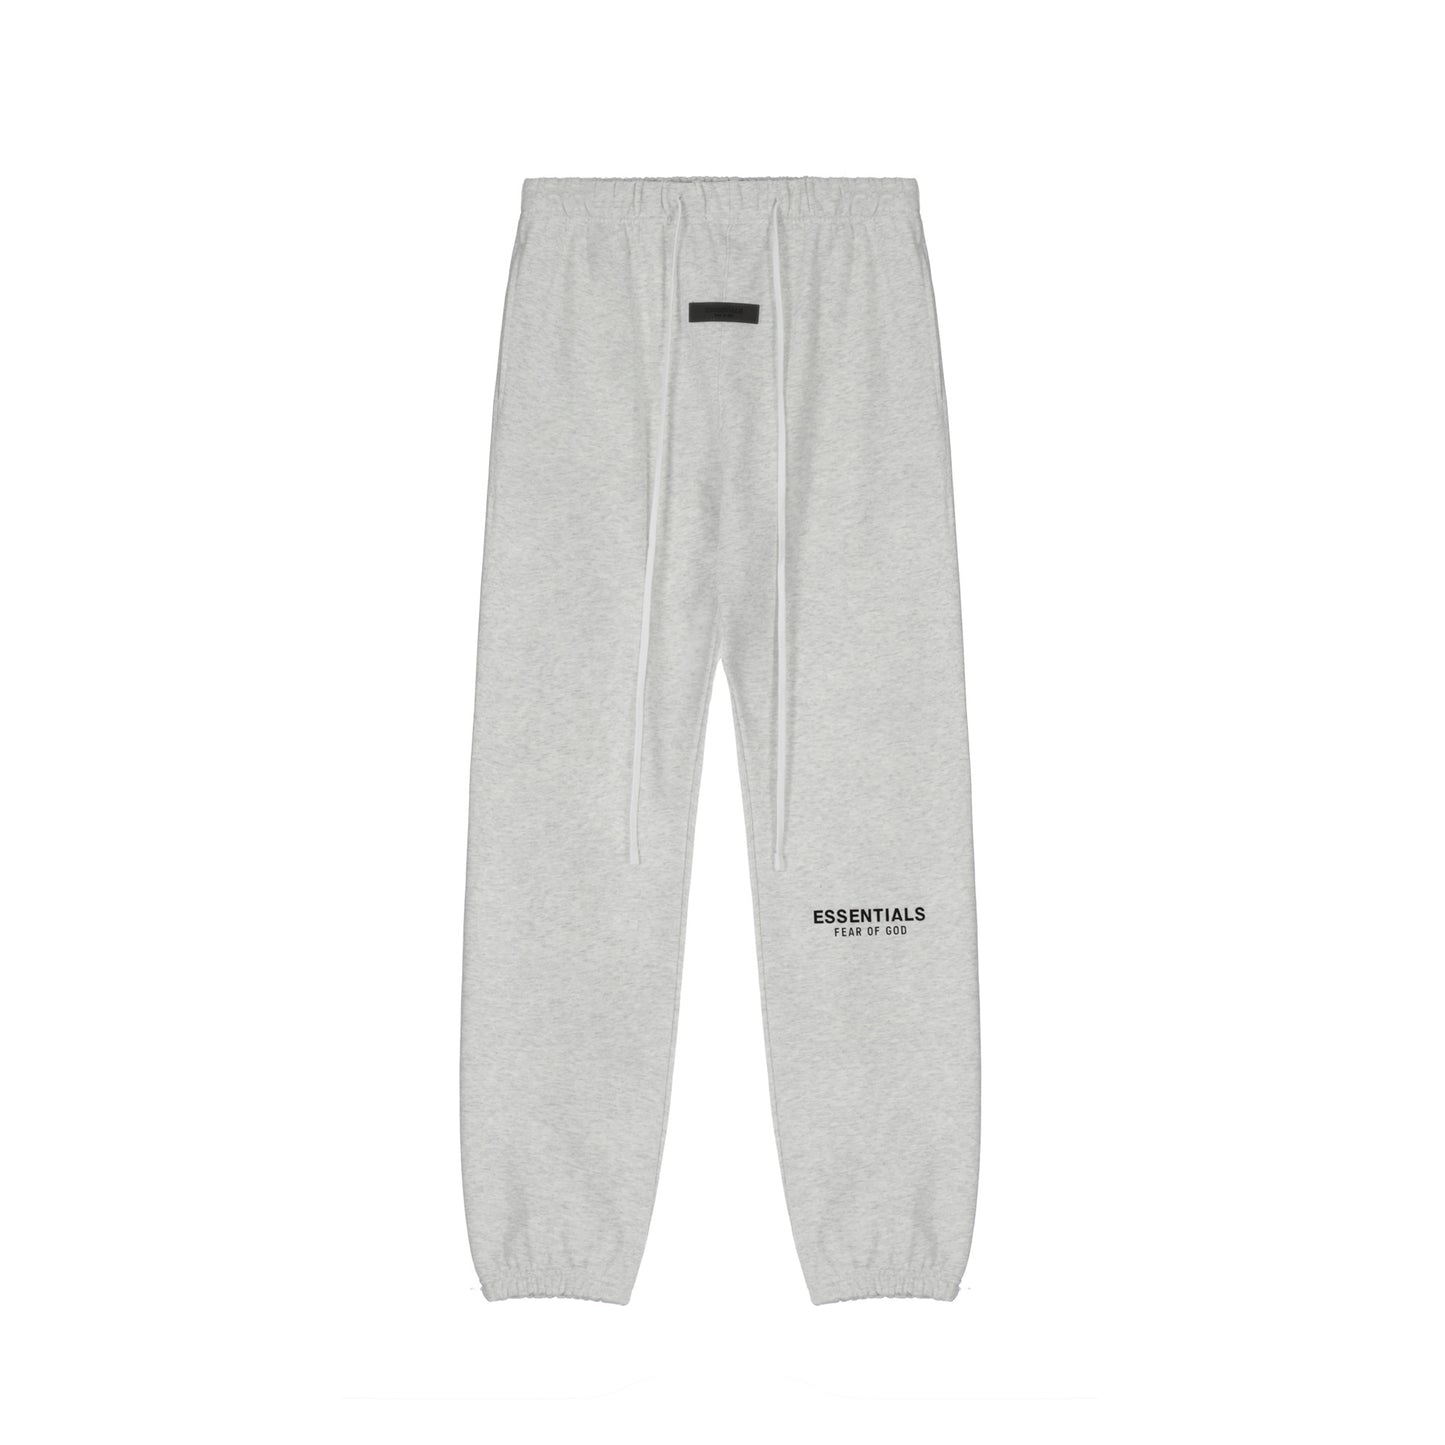 FOG Double Thread ESSENTIALS letter flocking casual pants men's and women's high street track pants